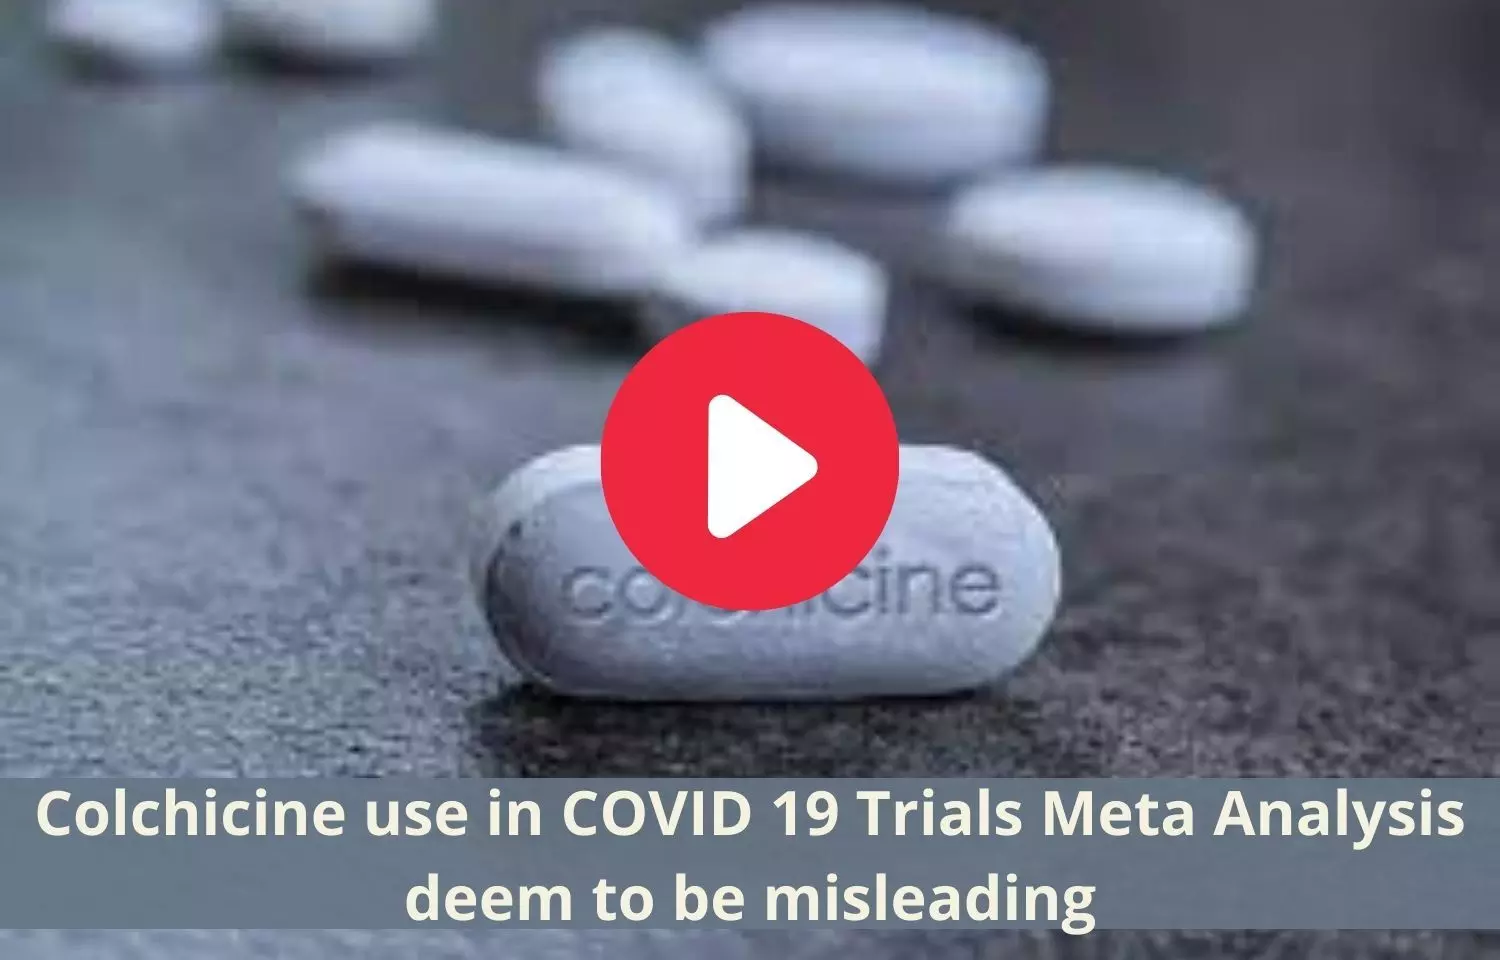 Results in Colchicine COVID-19 Trials Meta-Analysis are misleading